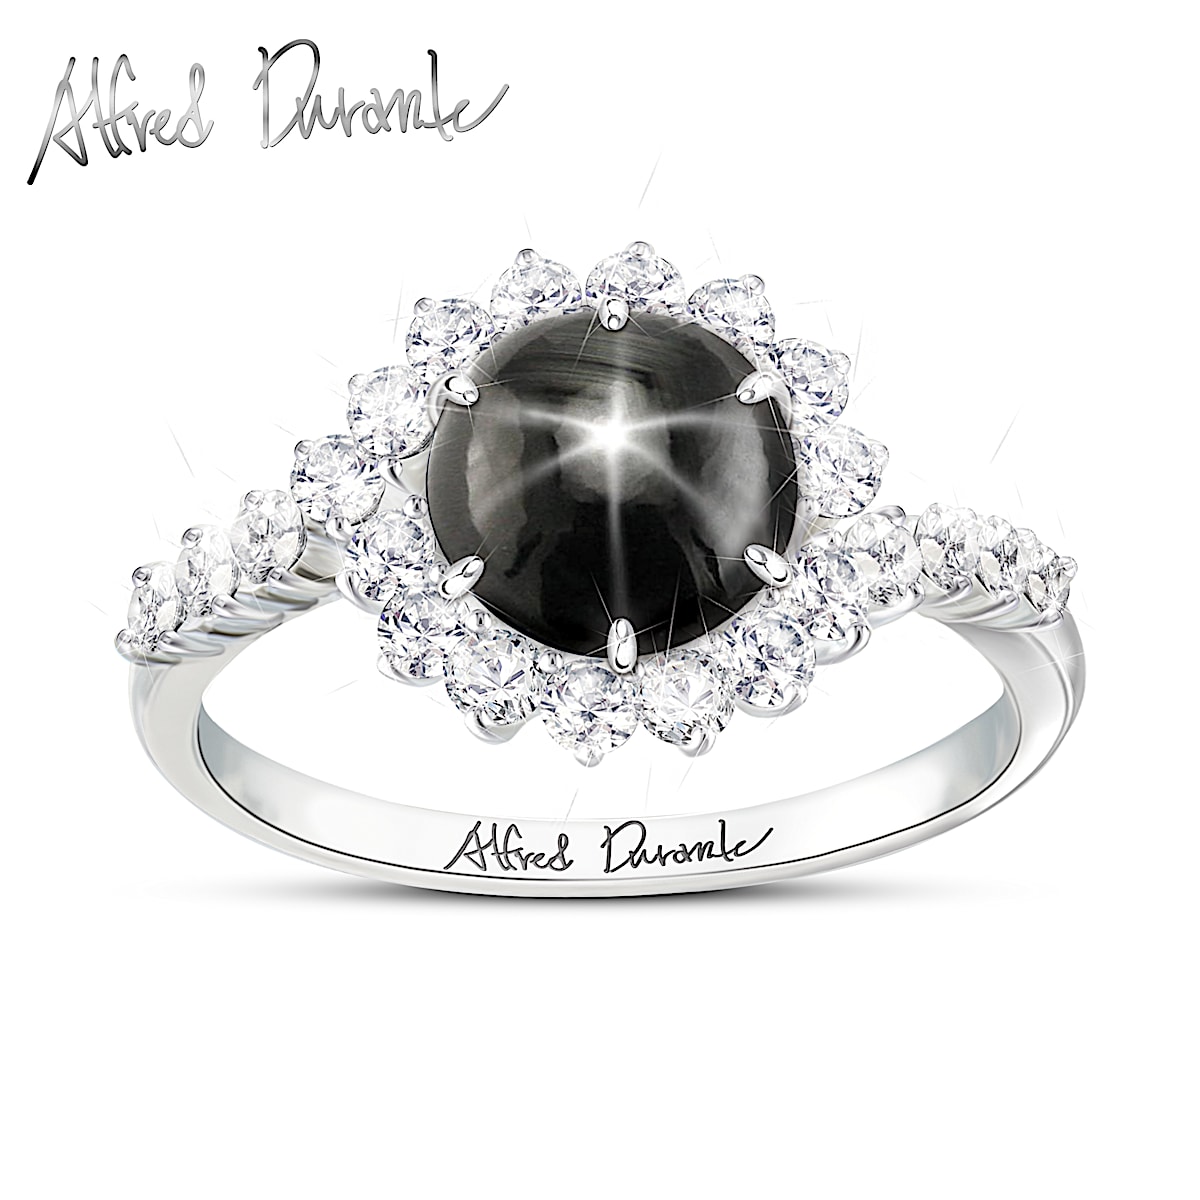 Starlight Serenade Womens Sterling Silver Ring Featuring A Black Star  Sapphire Center Stone Surrounded By A Halo Of White Topaz Stones